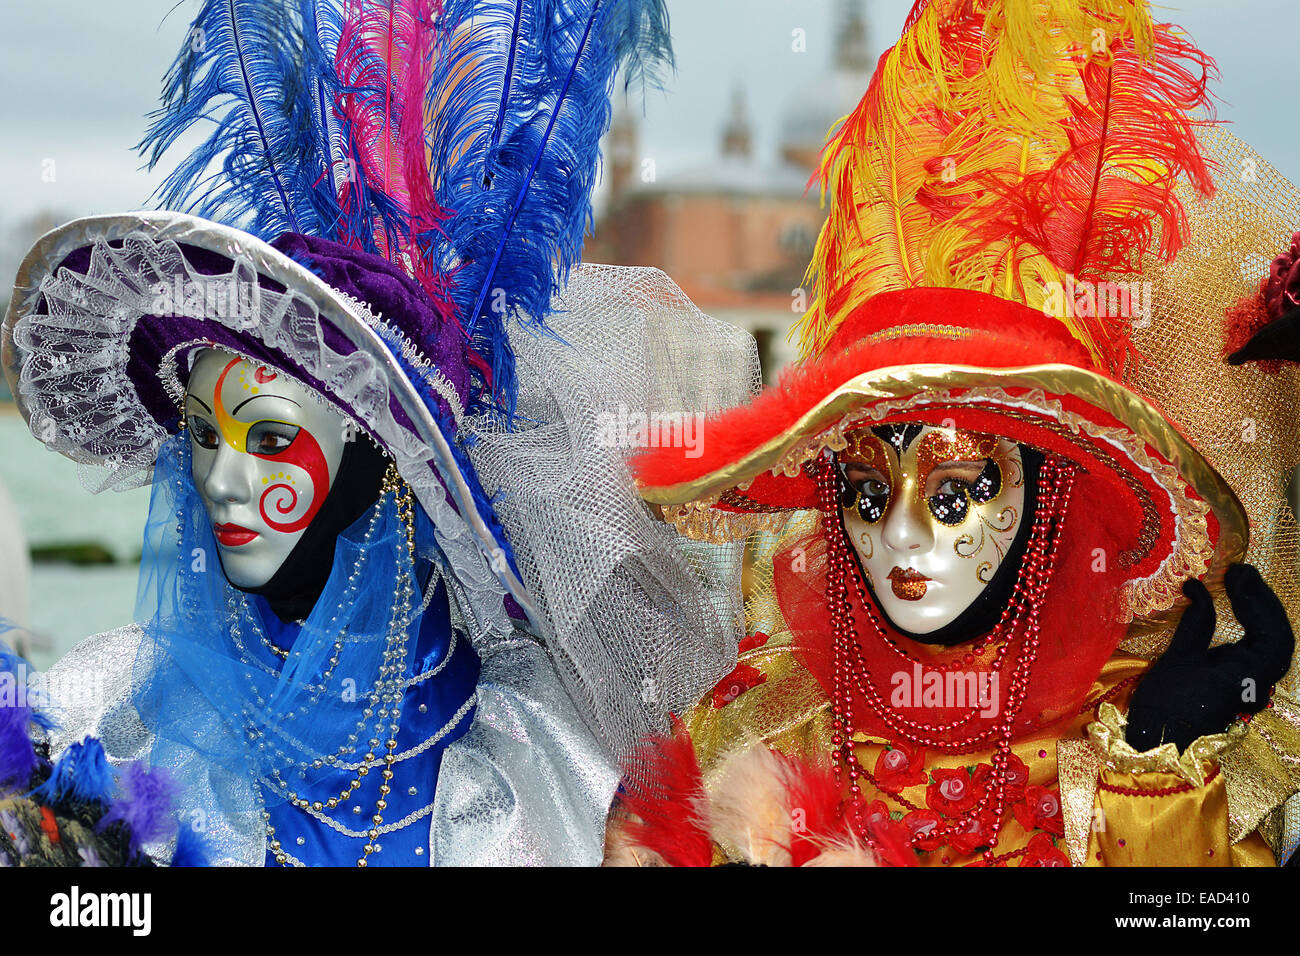 Two persons with mask and costume, Carnival Venice Stock Photo